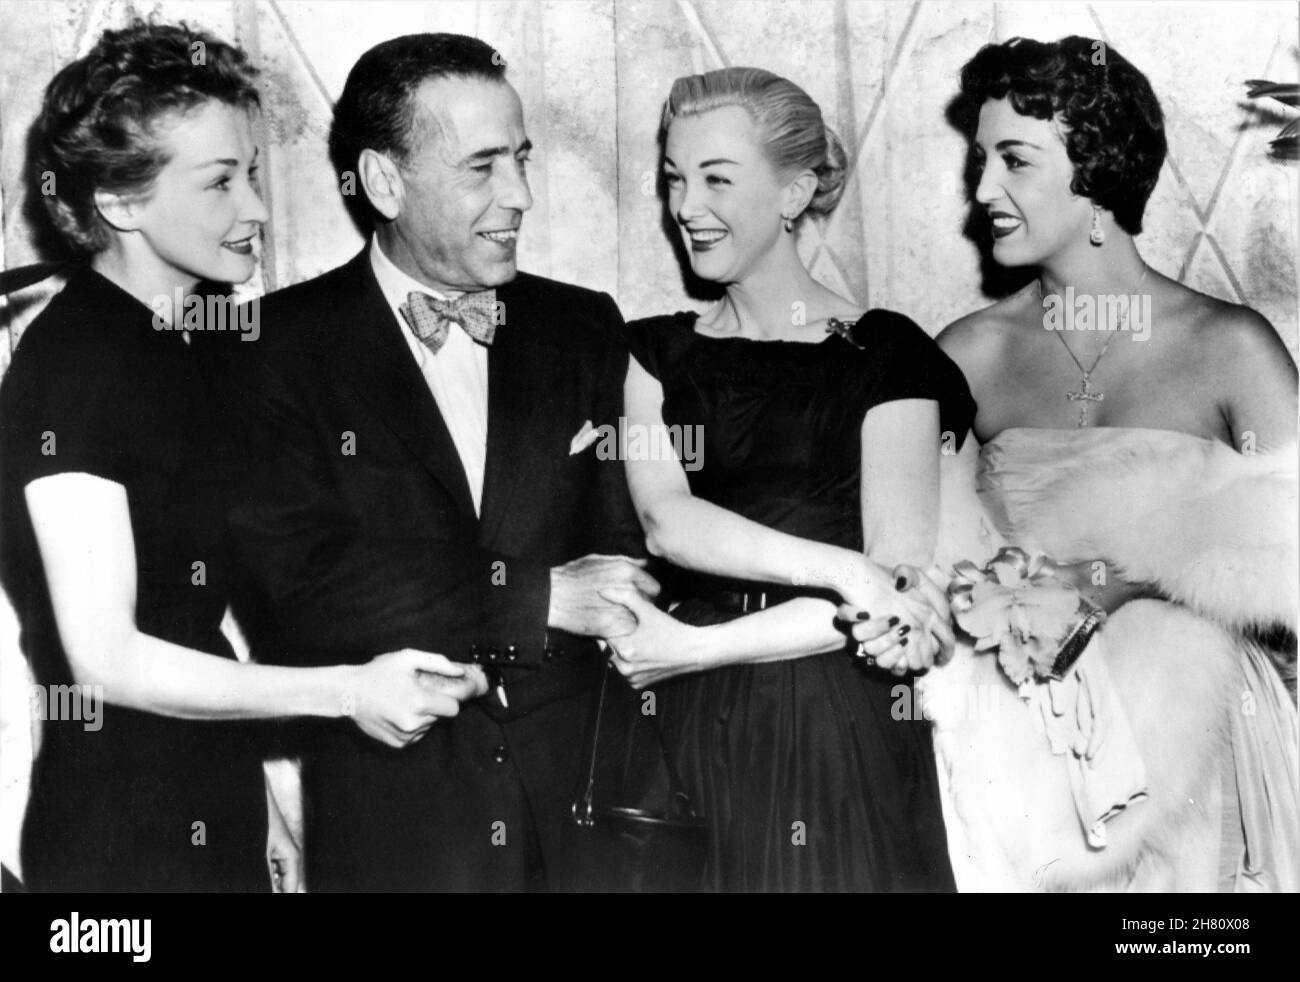 Oscar Nominees NINA FOCH (Supporting Actress in Executive Suite) HUMPHREY BOGART (Best Actor for The Caine Mutiny) JAN STERLING (Supporting Actress in The High and the Mighty) and KATY JURADO (Supporting Actress in Broken Lance) at a Hollywood Night Club celebrating the announcement of US TV of their nominations in February 1955 Stock Photo